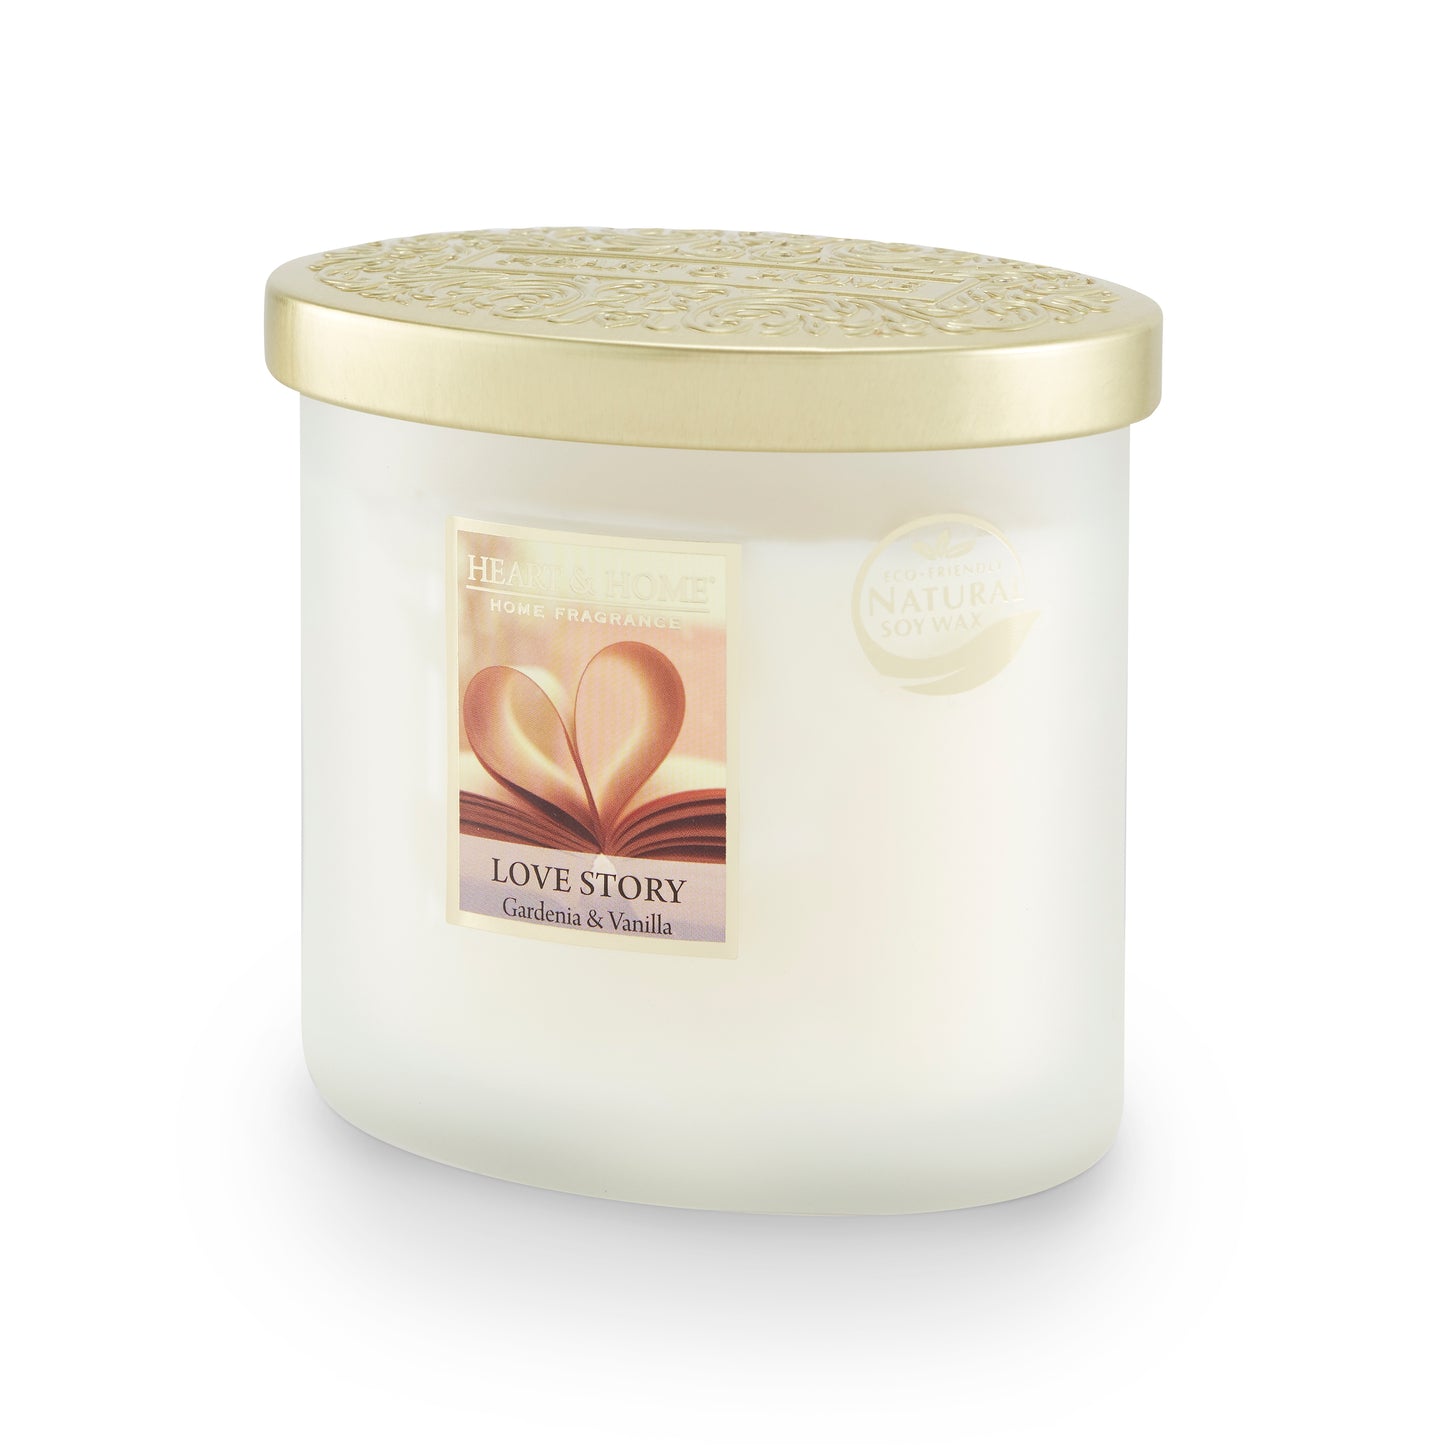 Gardenia & Vanilla Soy Wax Candle Lit With Love Candle Gift Idea